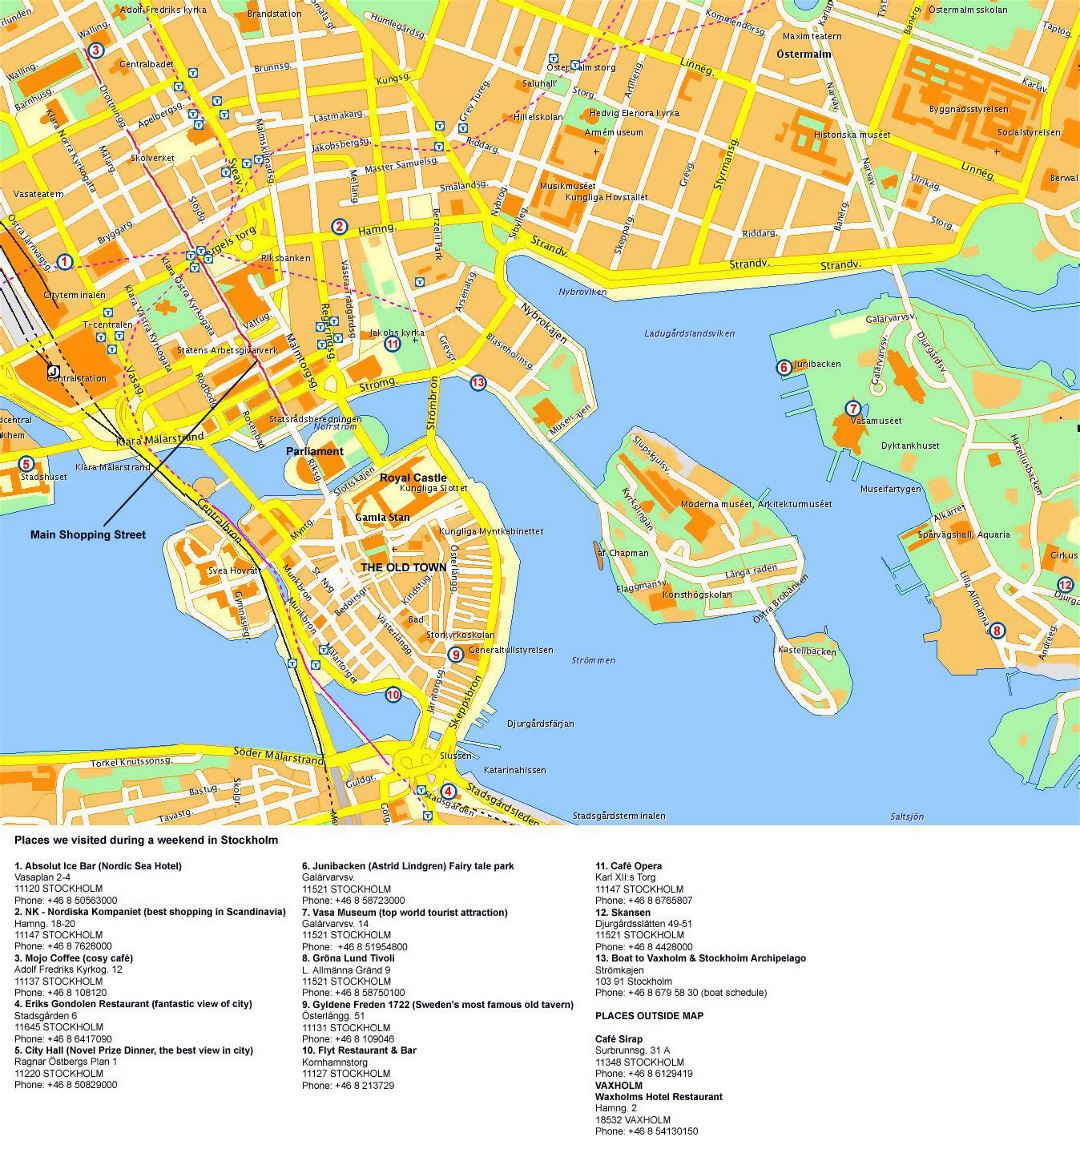 Detailed tourist map of Stockholm city center